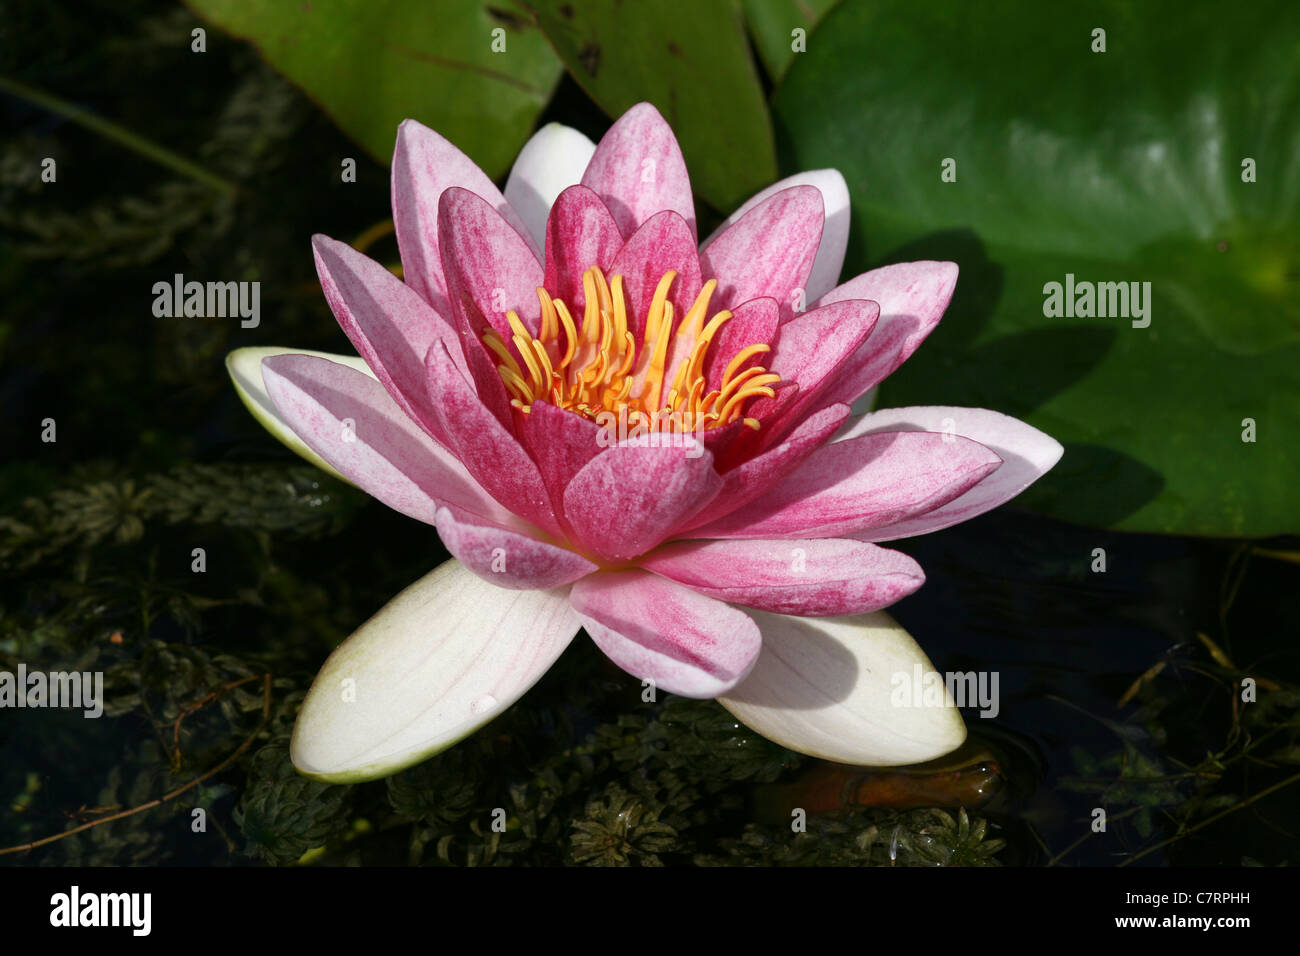 Pink Water Lily Nymphaea sp. Stock Photo